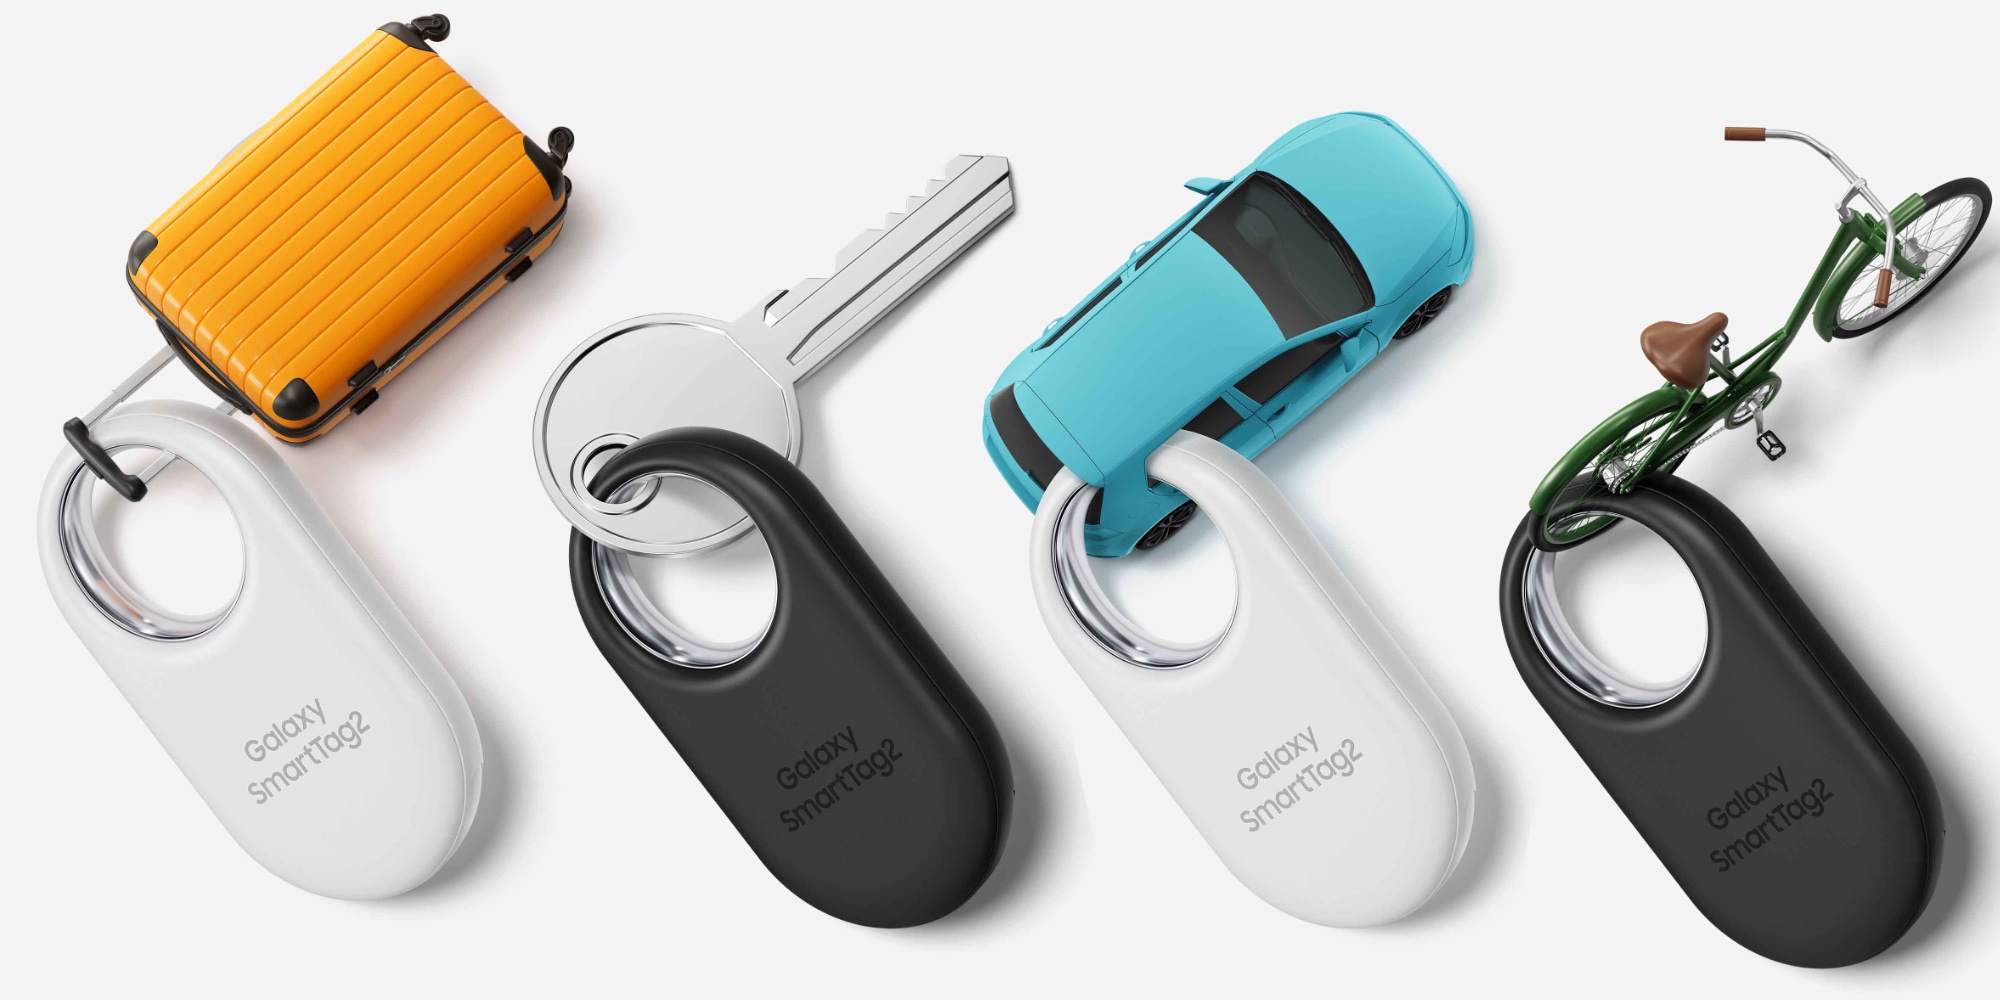 Samsung Galaxy SmartTag 2 keep tabs on your keys, bags, more at